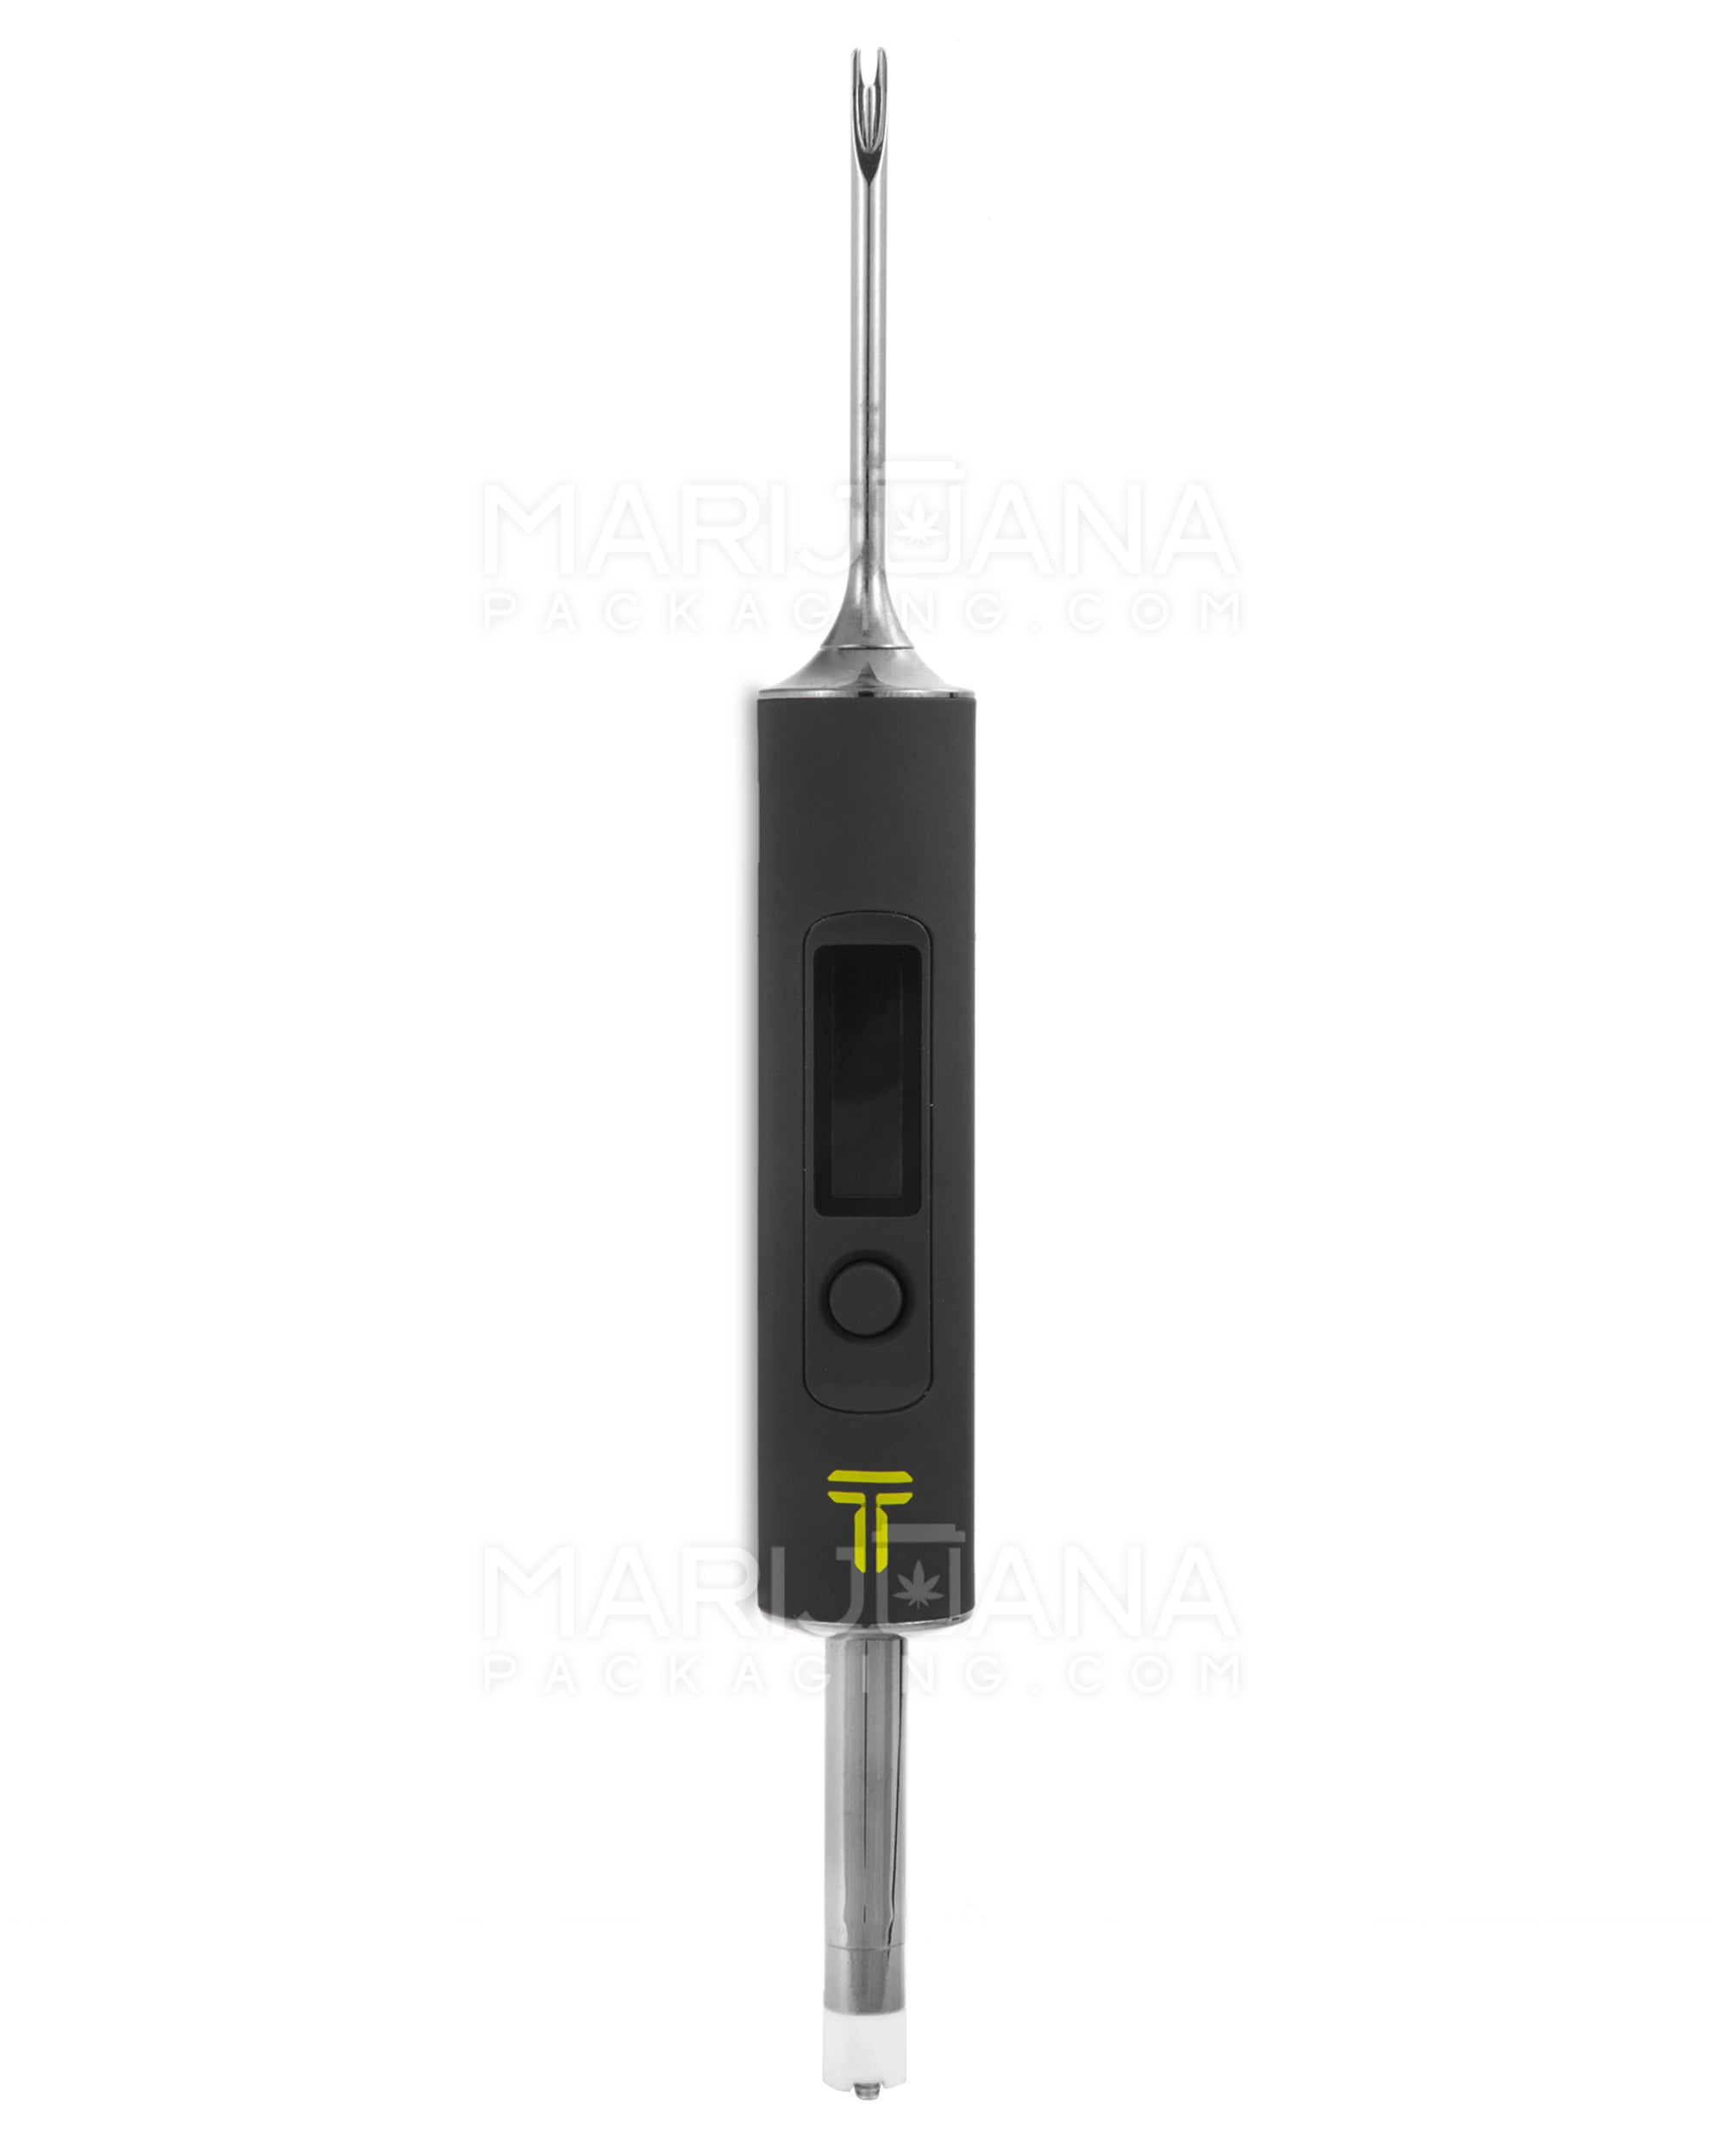 TERPOMETER | Temperature Indicating Thermometer Dab Tool w/ USB Cable | 6.5in Long - Titanium - Black - 1